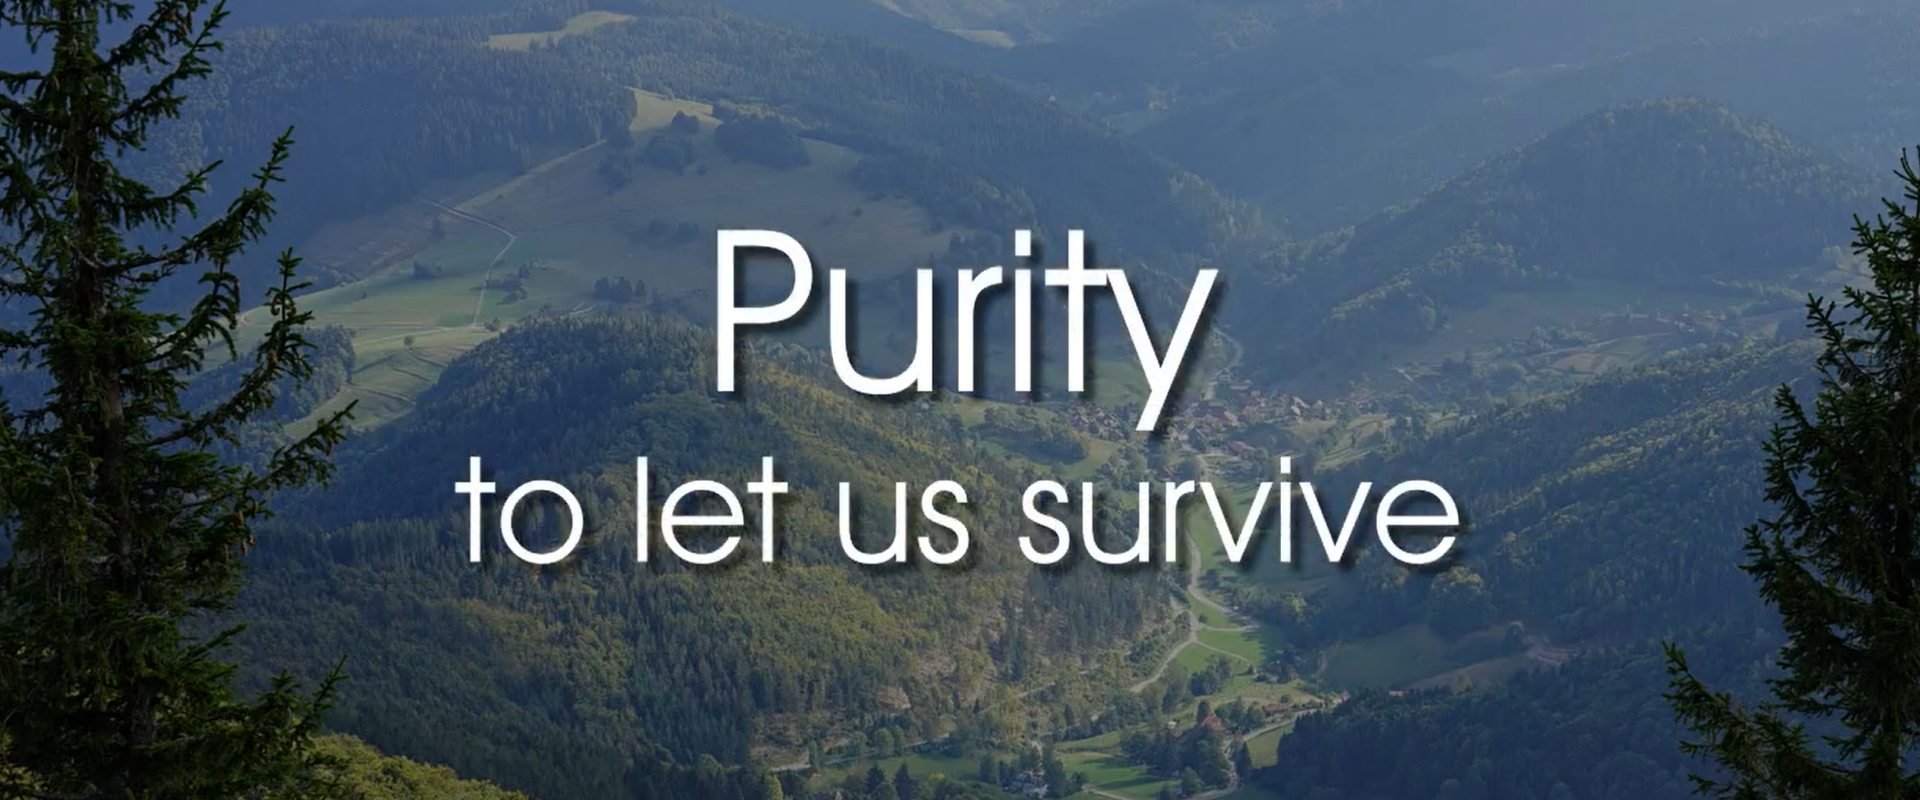 Purity to survive